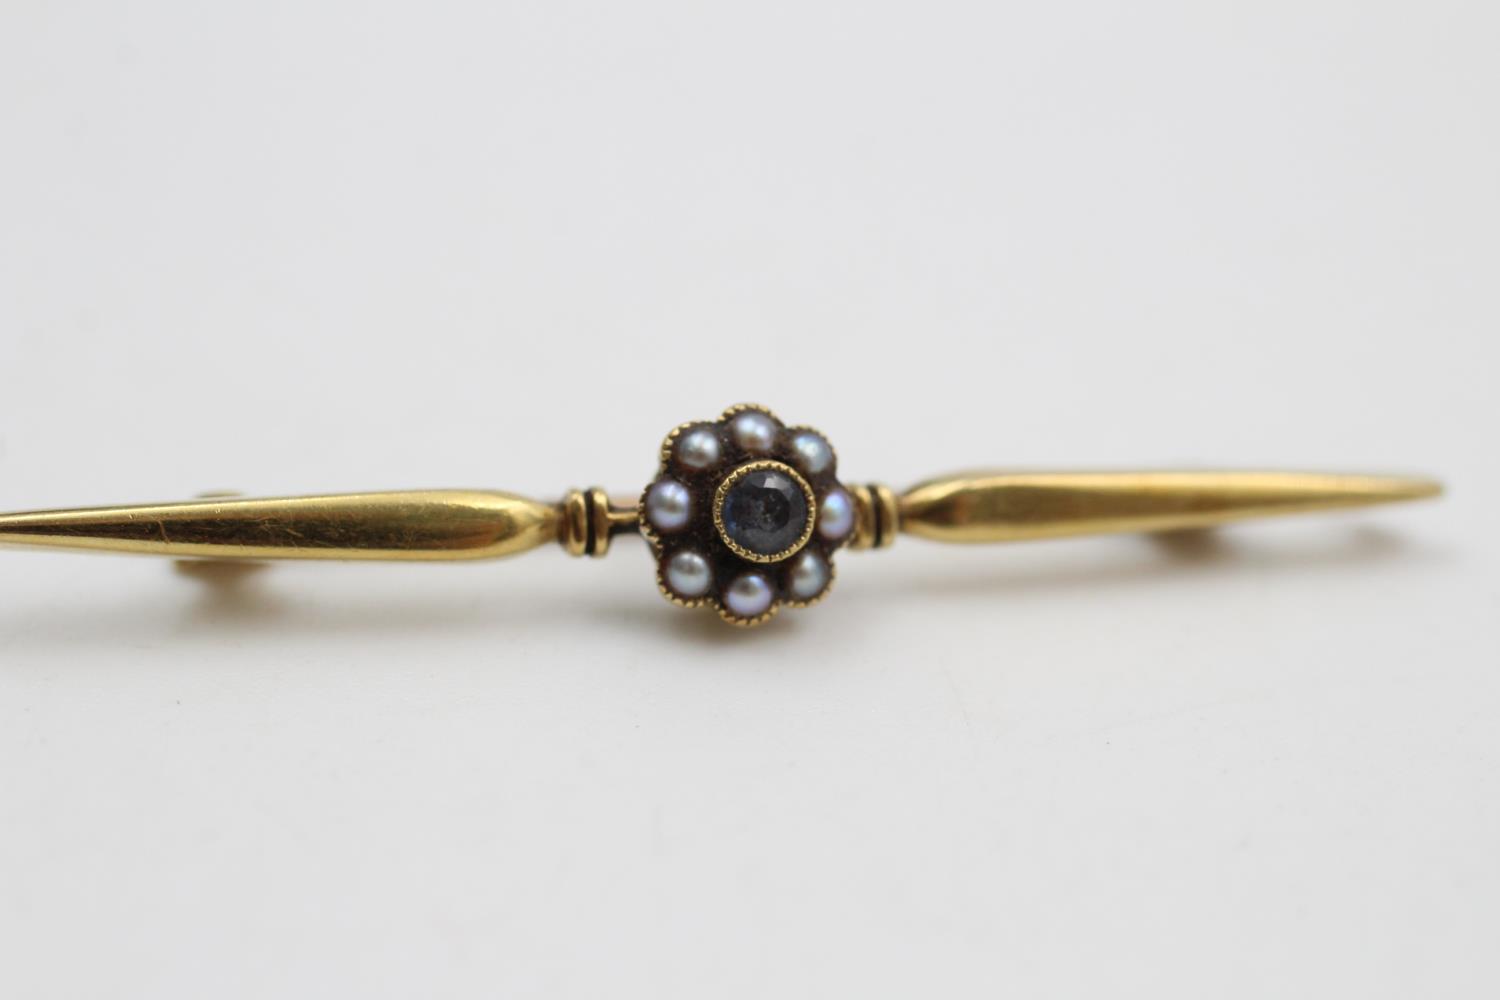 15ct gold antique sapphire & seed pearl halo bar brooch 3.8 grams gross - Image 2 of 5